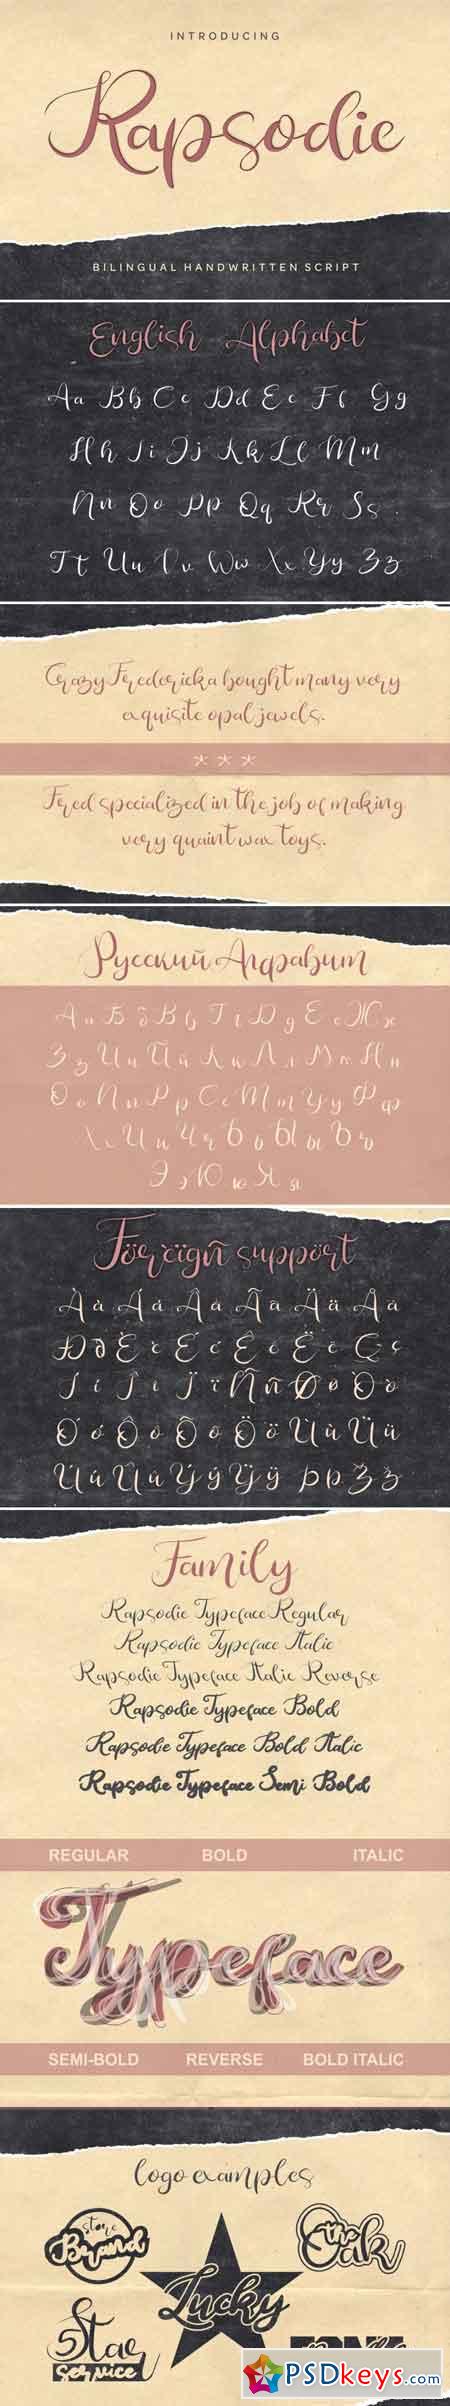 Rapsodie - Multilingual Script With English and Russian Letters 3514432